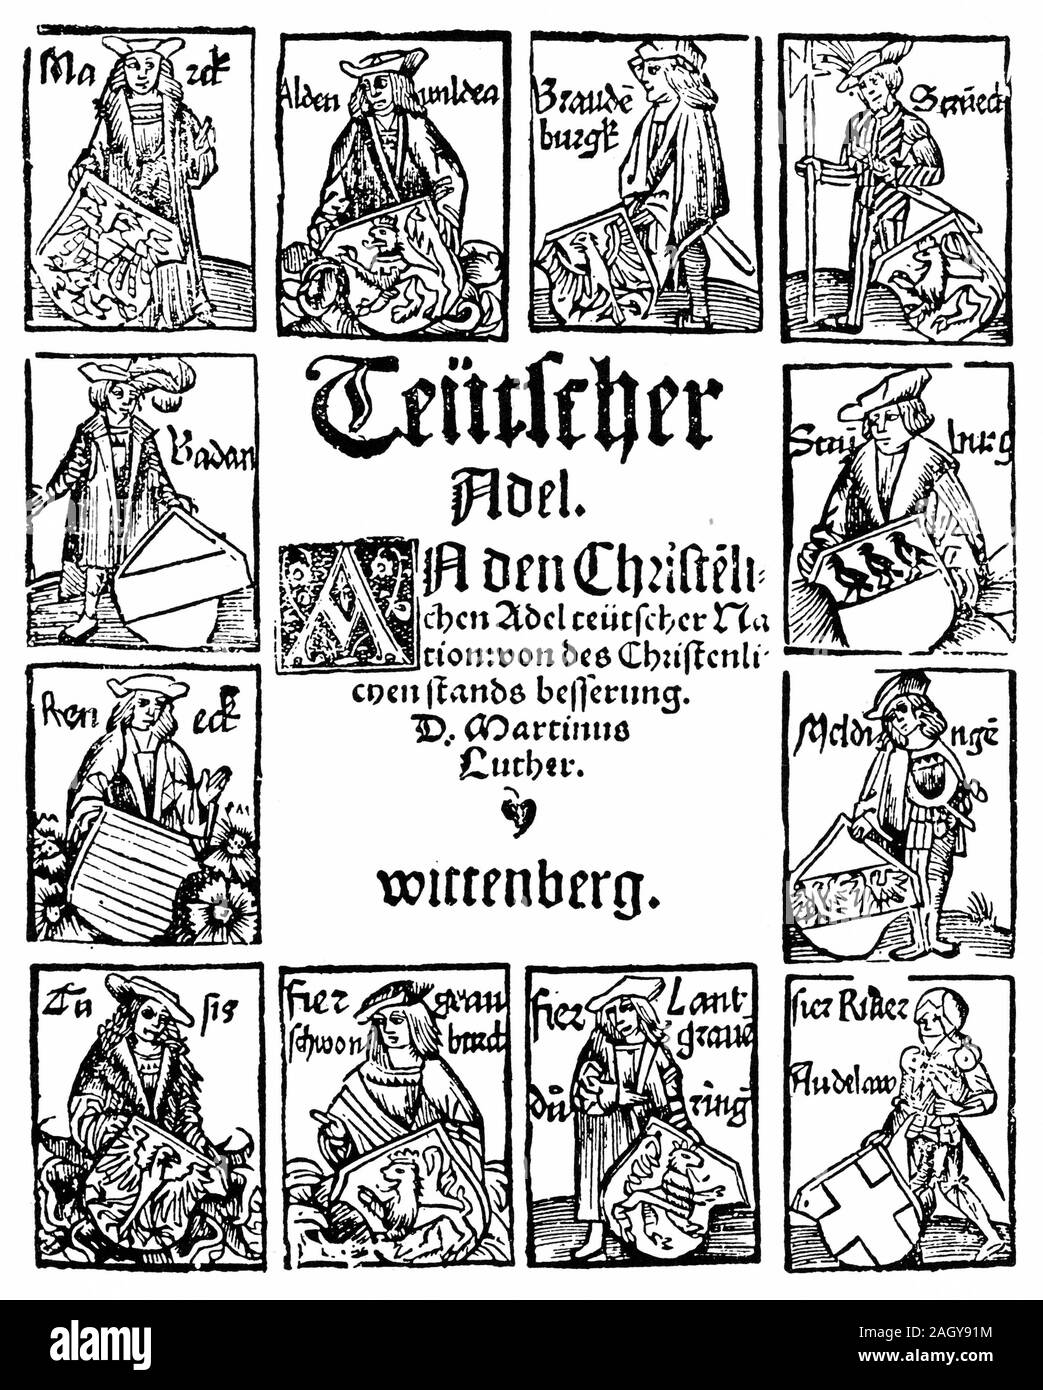 Engraved cover of a 1520 tract by Martin Luther:  To the Christian Nobility of the German Nation (German: An den christlichen Adel deutscher Nation) setting out his signature doctrines of the priesthood of all believers and the two kingdoms. Written in German. Stock Photo